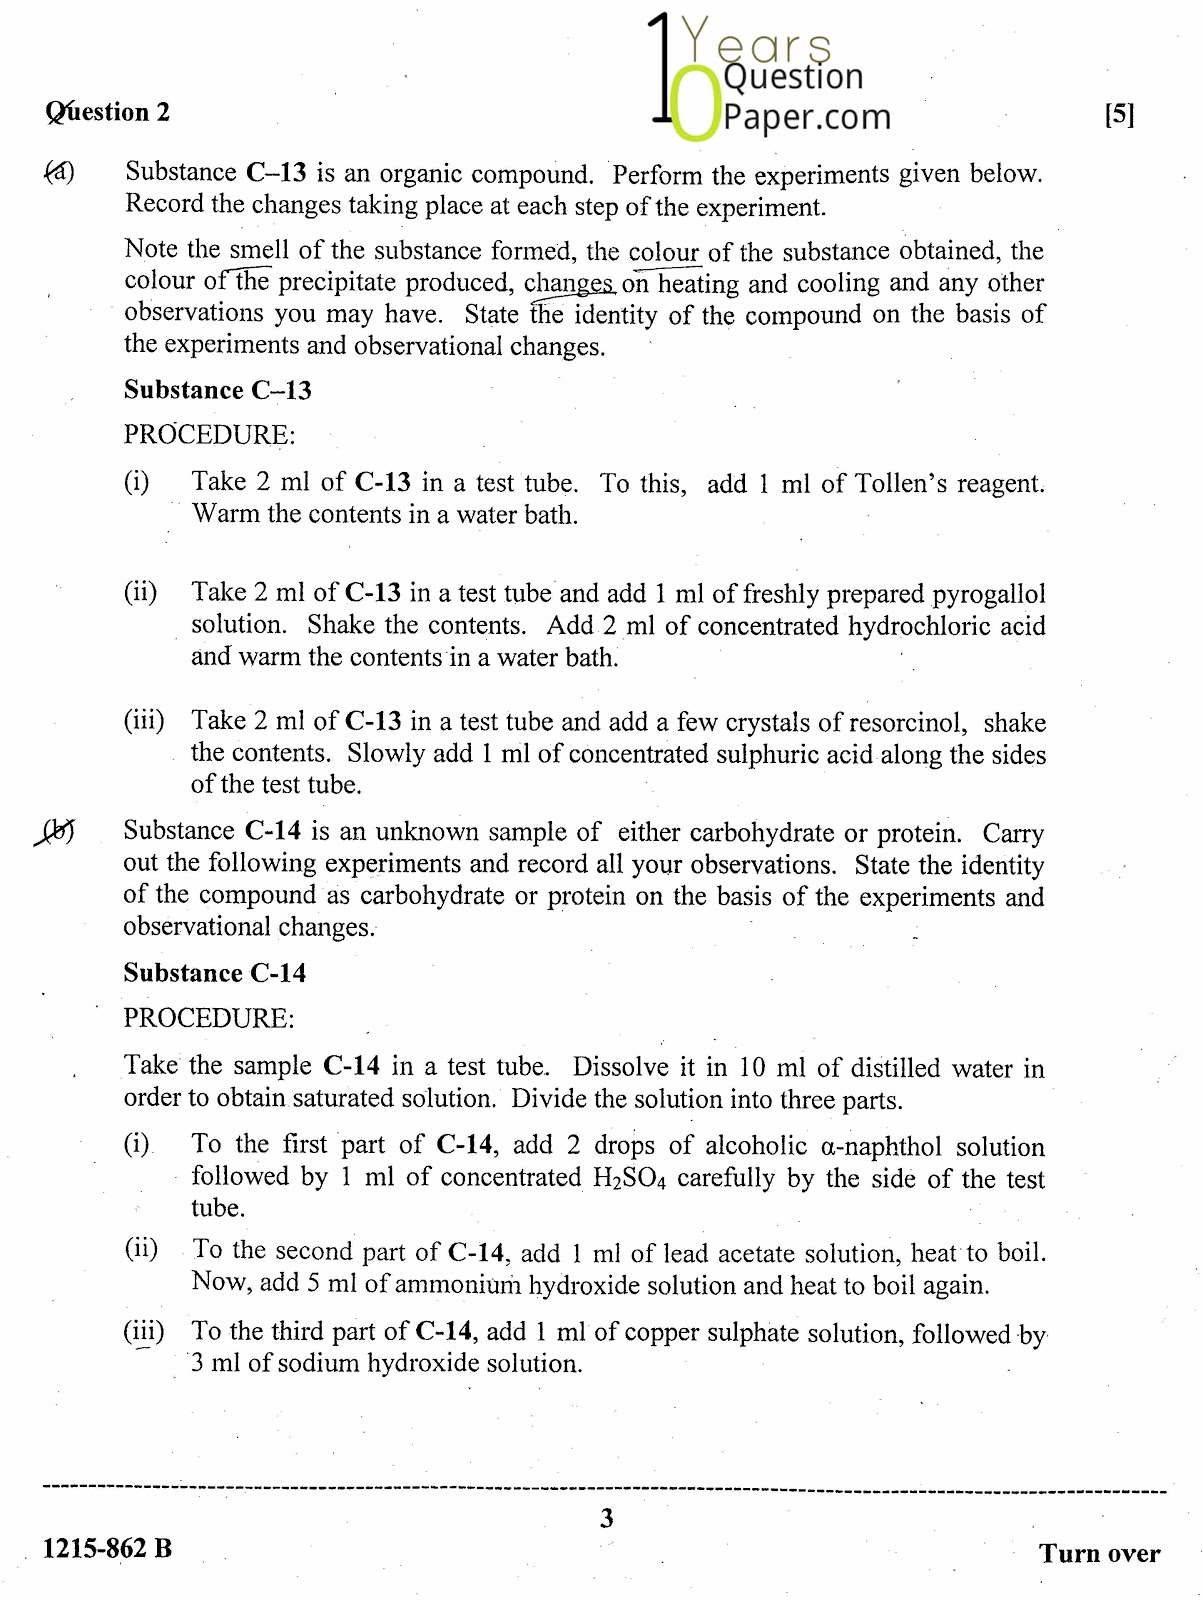 ISC Class 12 Chemistry Practical 2015 Question Paper